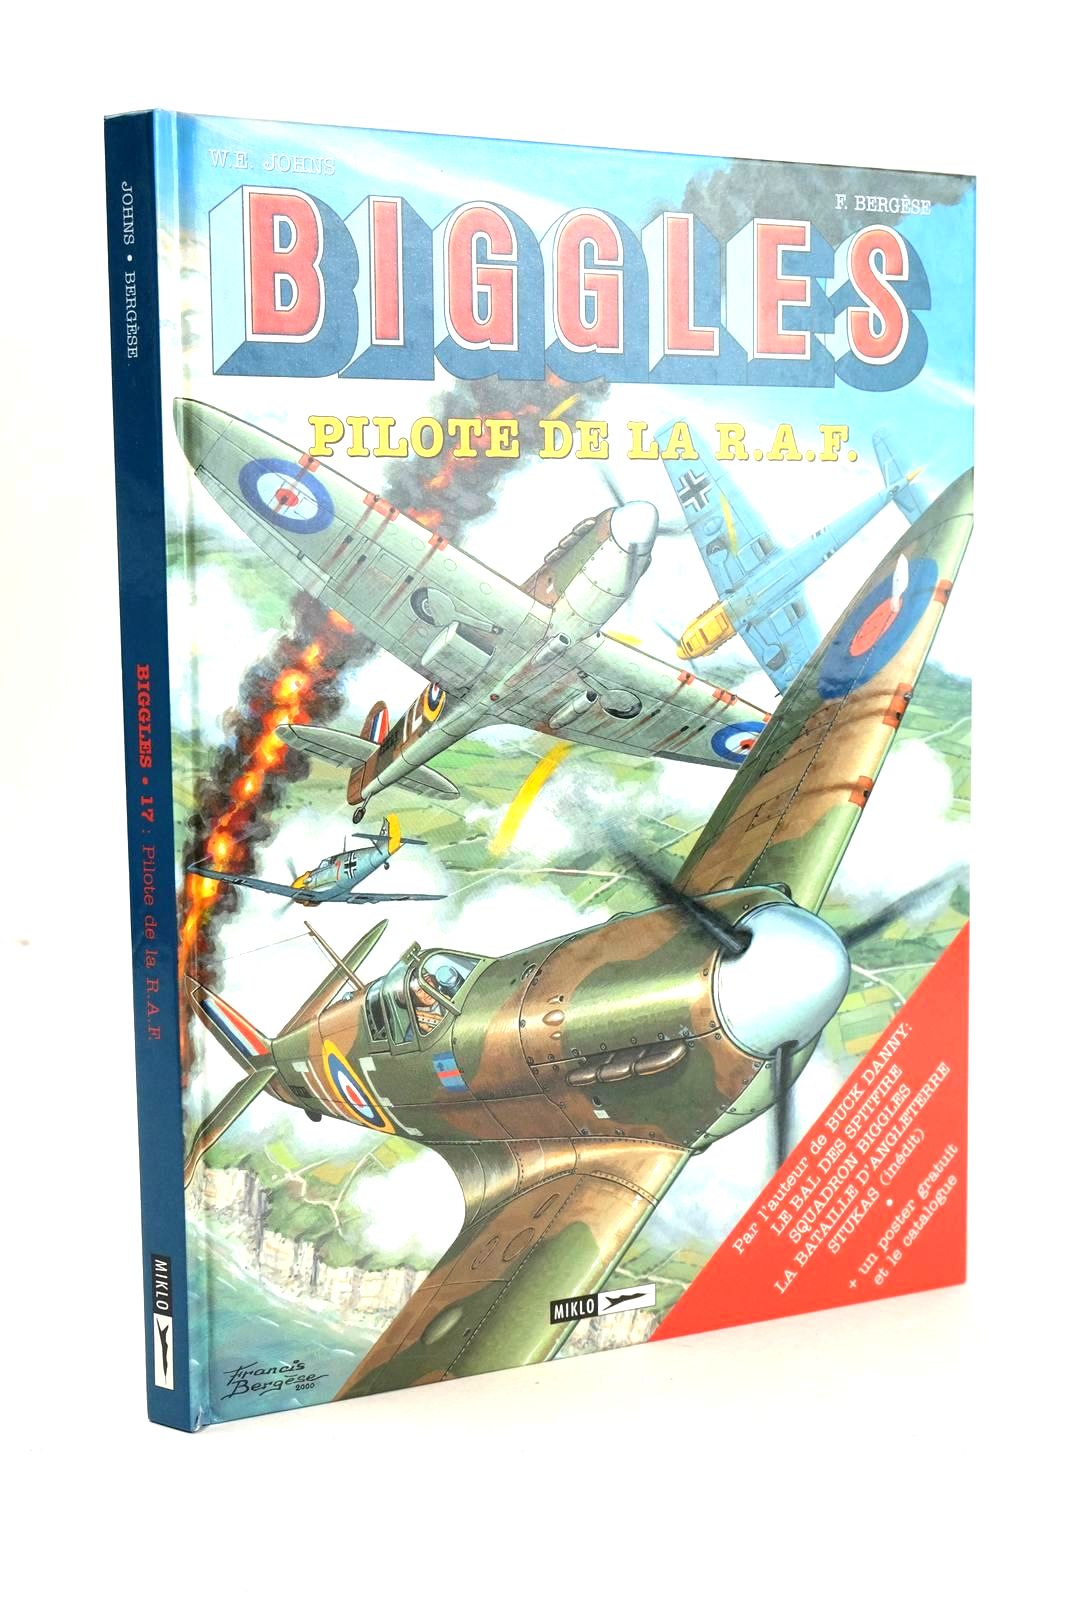 Photo of BIGGLES PILOTE DE LA R.A.F. LE BAL DES SPITFIRE written by Johns, W.E. illustrated by Bergese, Francis published by Miklo (STOCK CODE: 1326321)  for sale by Stella & Rose's Books